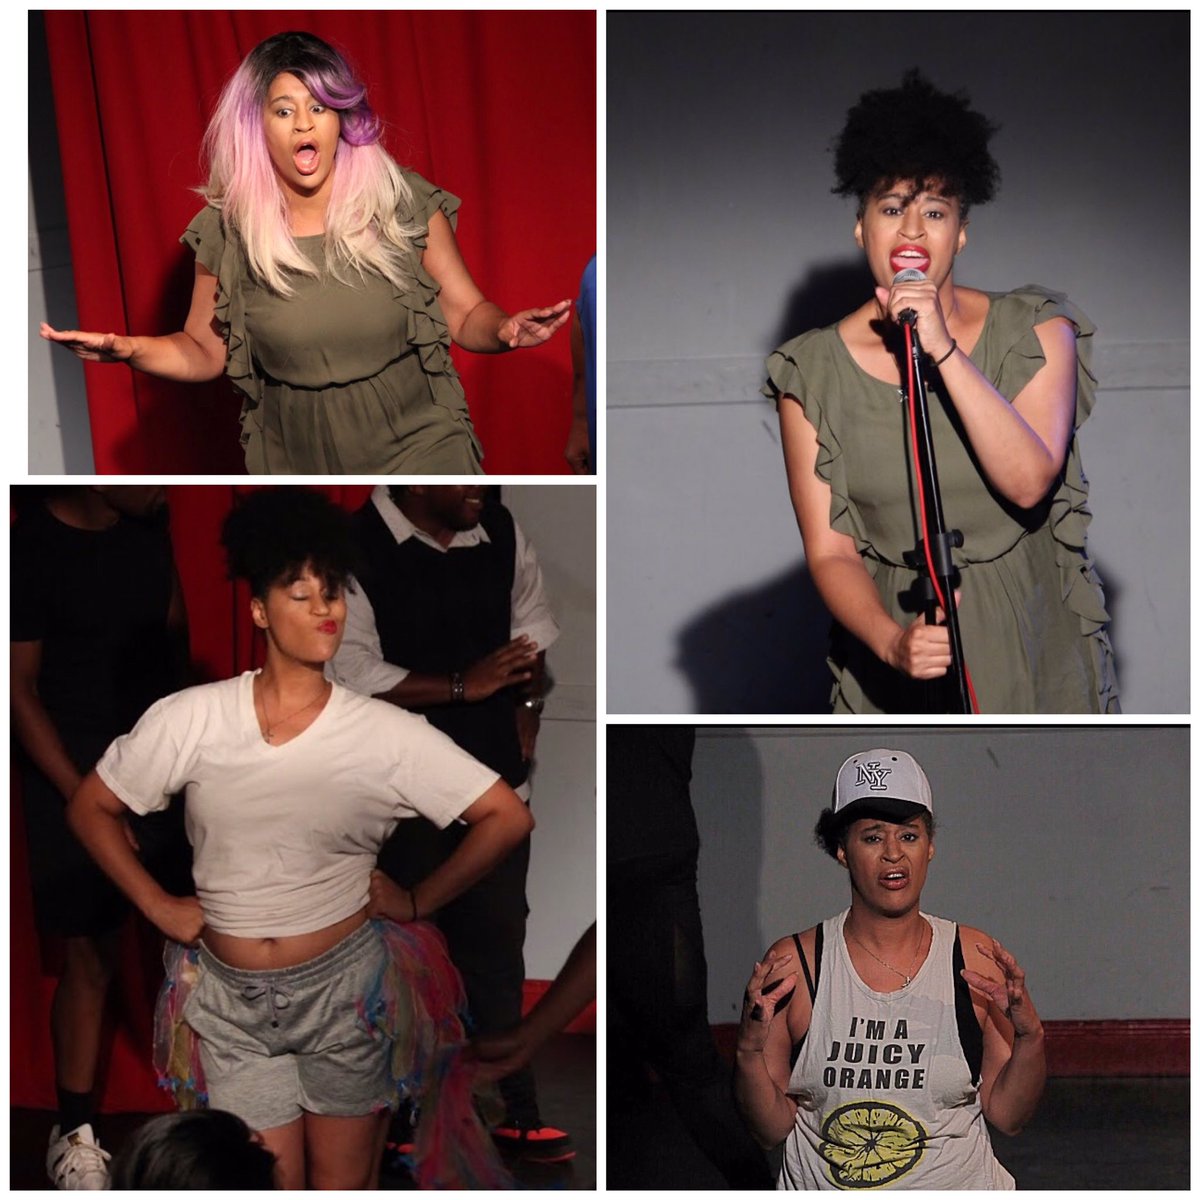 Rock the Bells Vol. 1
Alumni Kaili Y. Turner

Roles:
Co- Host of Show
Paul in Fox and Friends Yoga Studio
Isabella in Ese’s in the Schoolyard 
LaShondra in Backstage at Beyoncé 
#StandUpcomedy#HipHopVarietyShow #HipHop #NYC #Sketchcomedy #BlackComedians#LatinxComedians